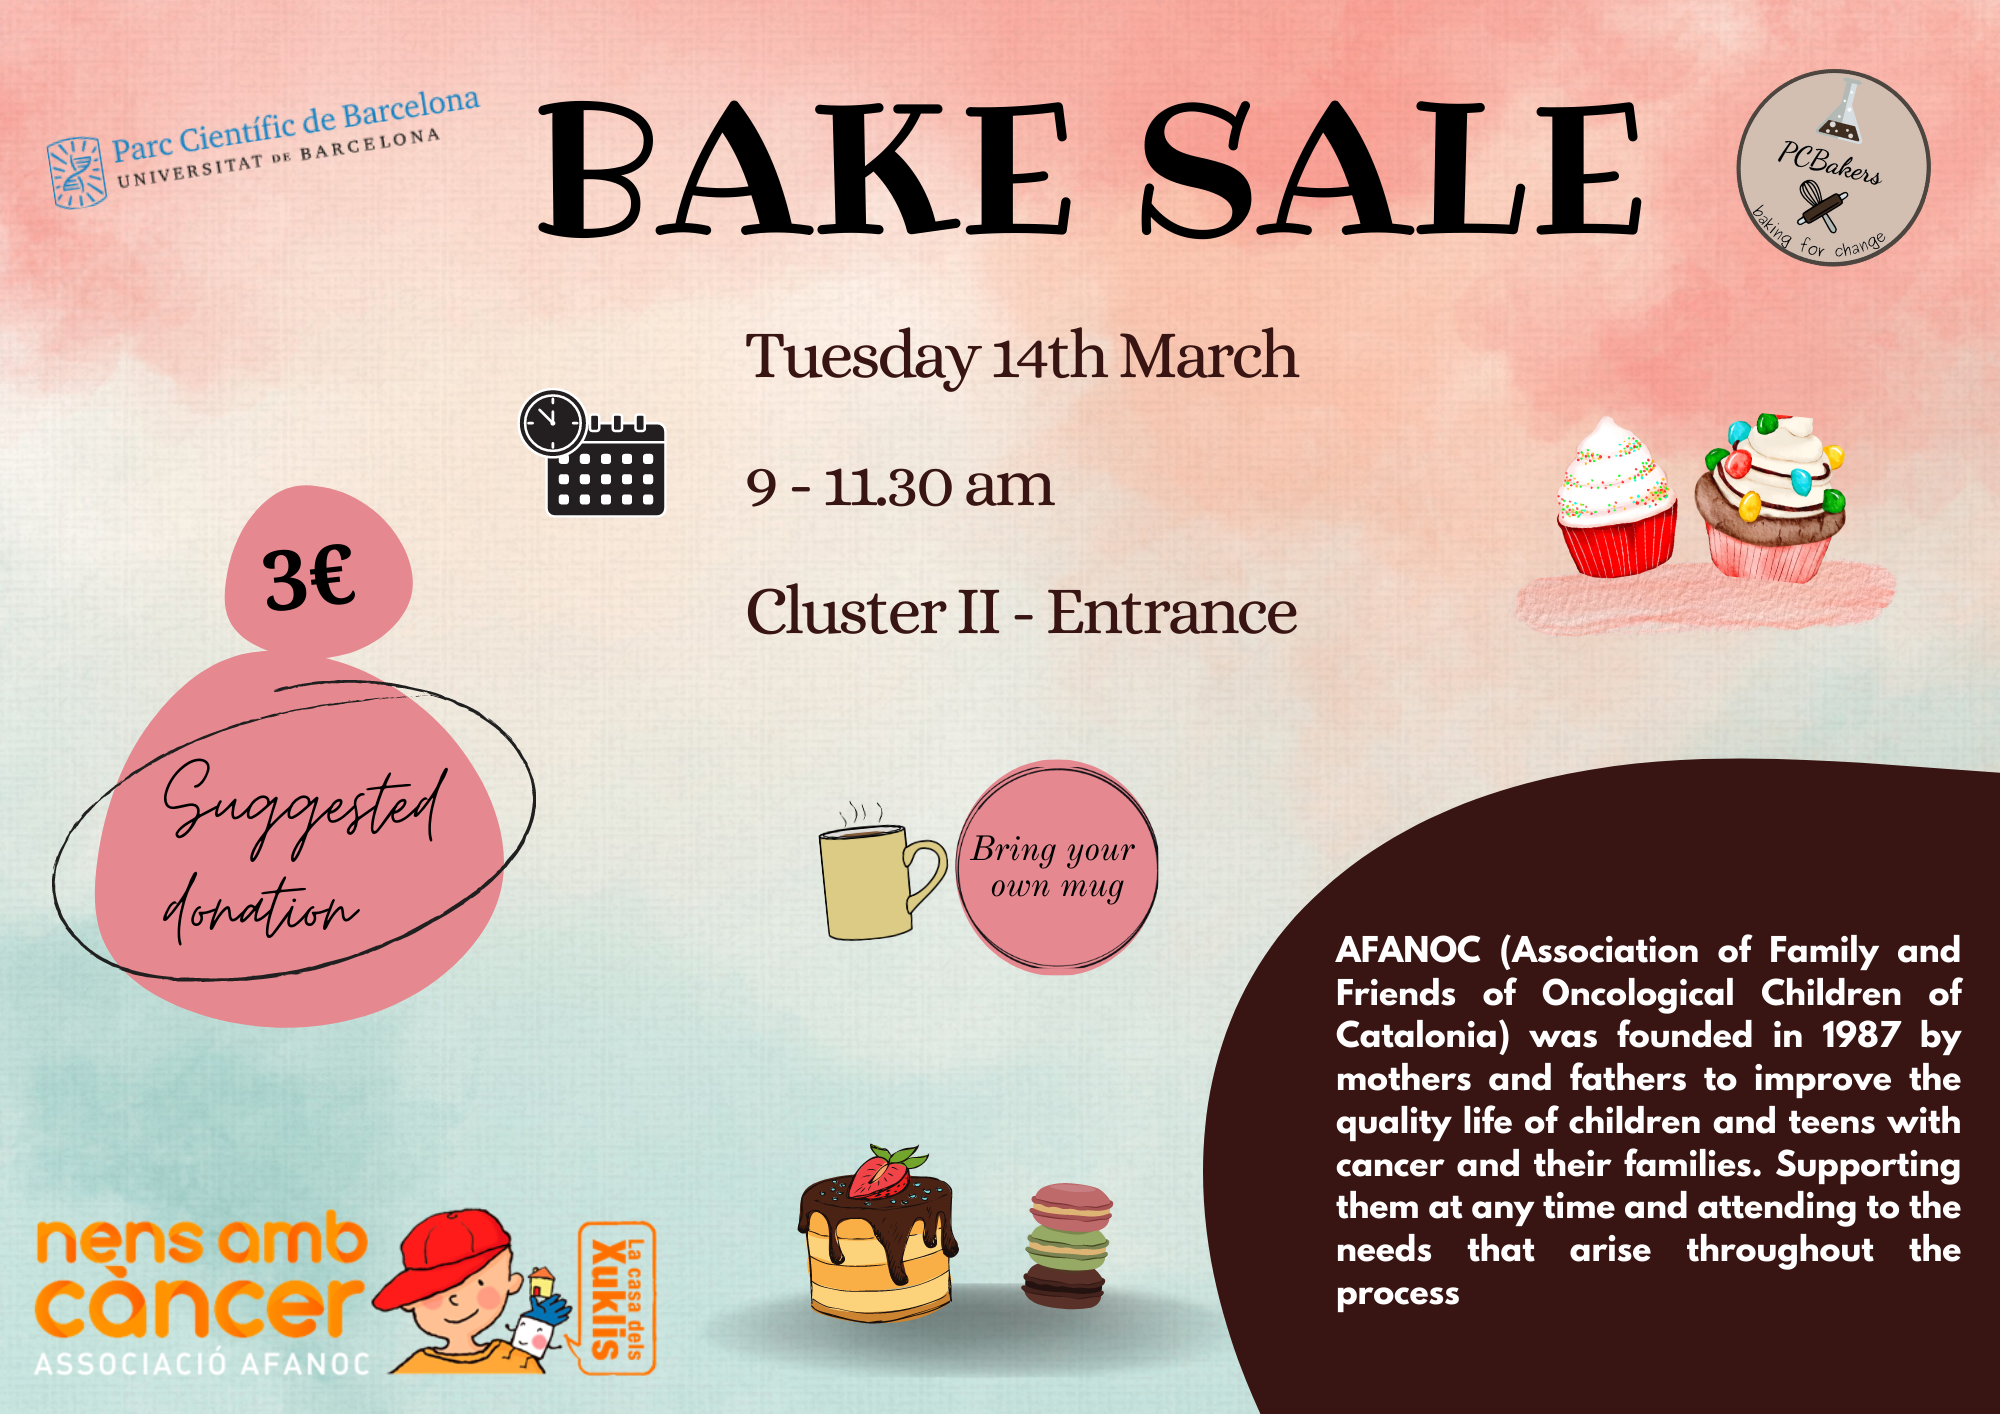 Bake Sale March 14th - AFANOC